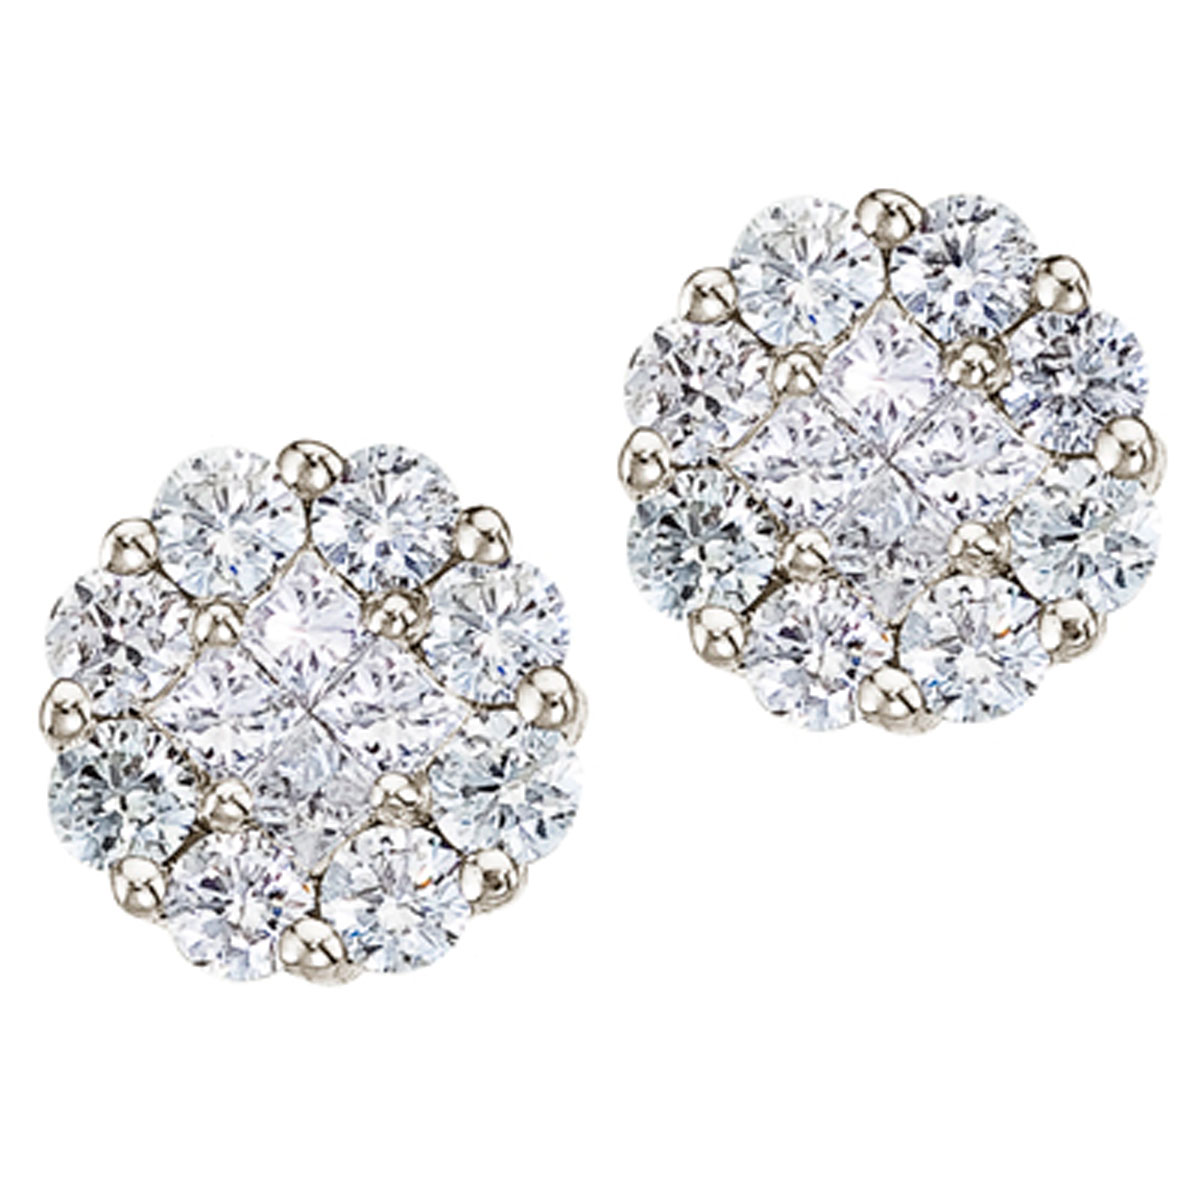 Gorgeous 14k white gold earrings with a full carat of shimmering genuine diamonds. Clustaires giv...